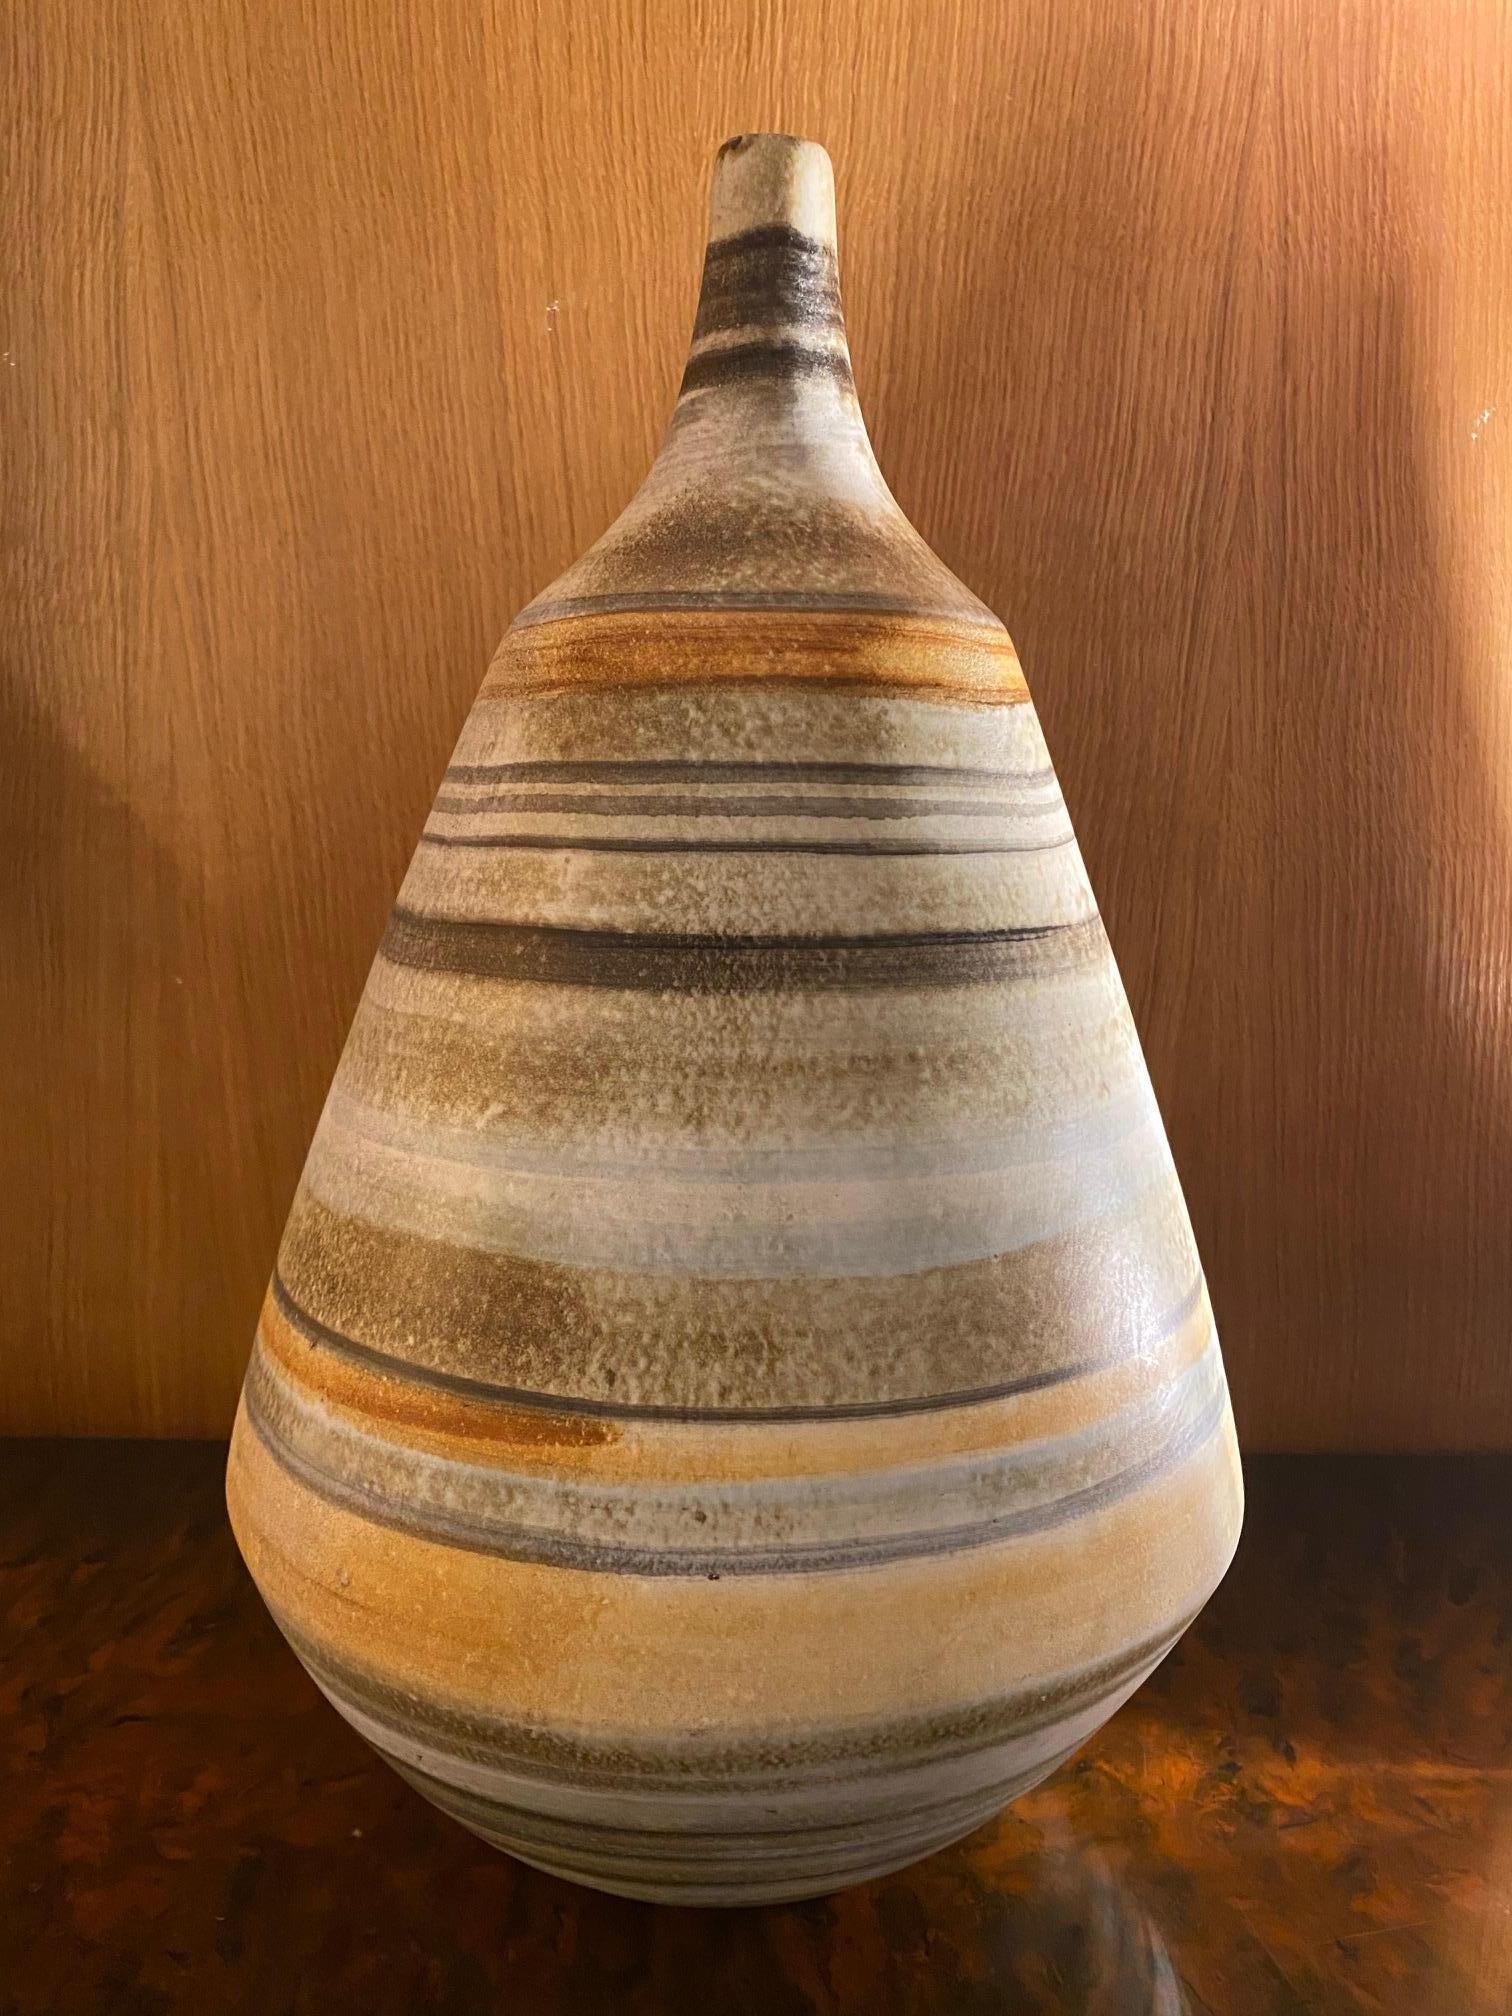 Ceramic vase by Les 2 Potiers, Jacques and Michelle Serre, active in France between 1956 and 1970.